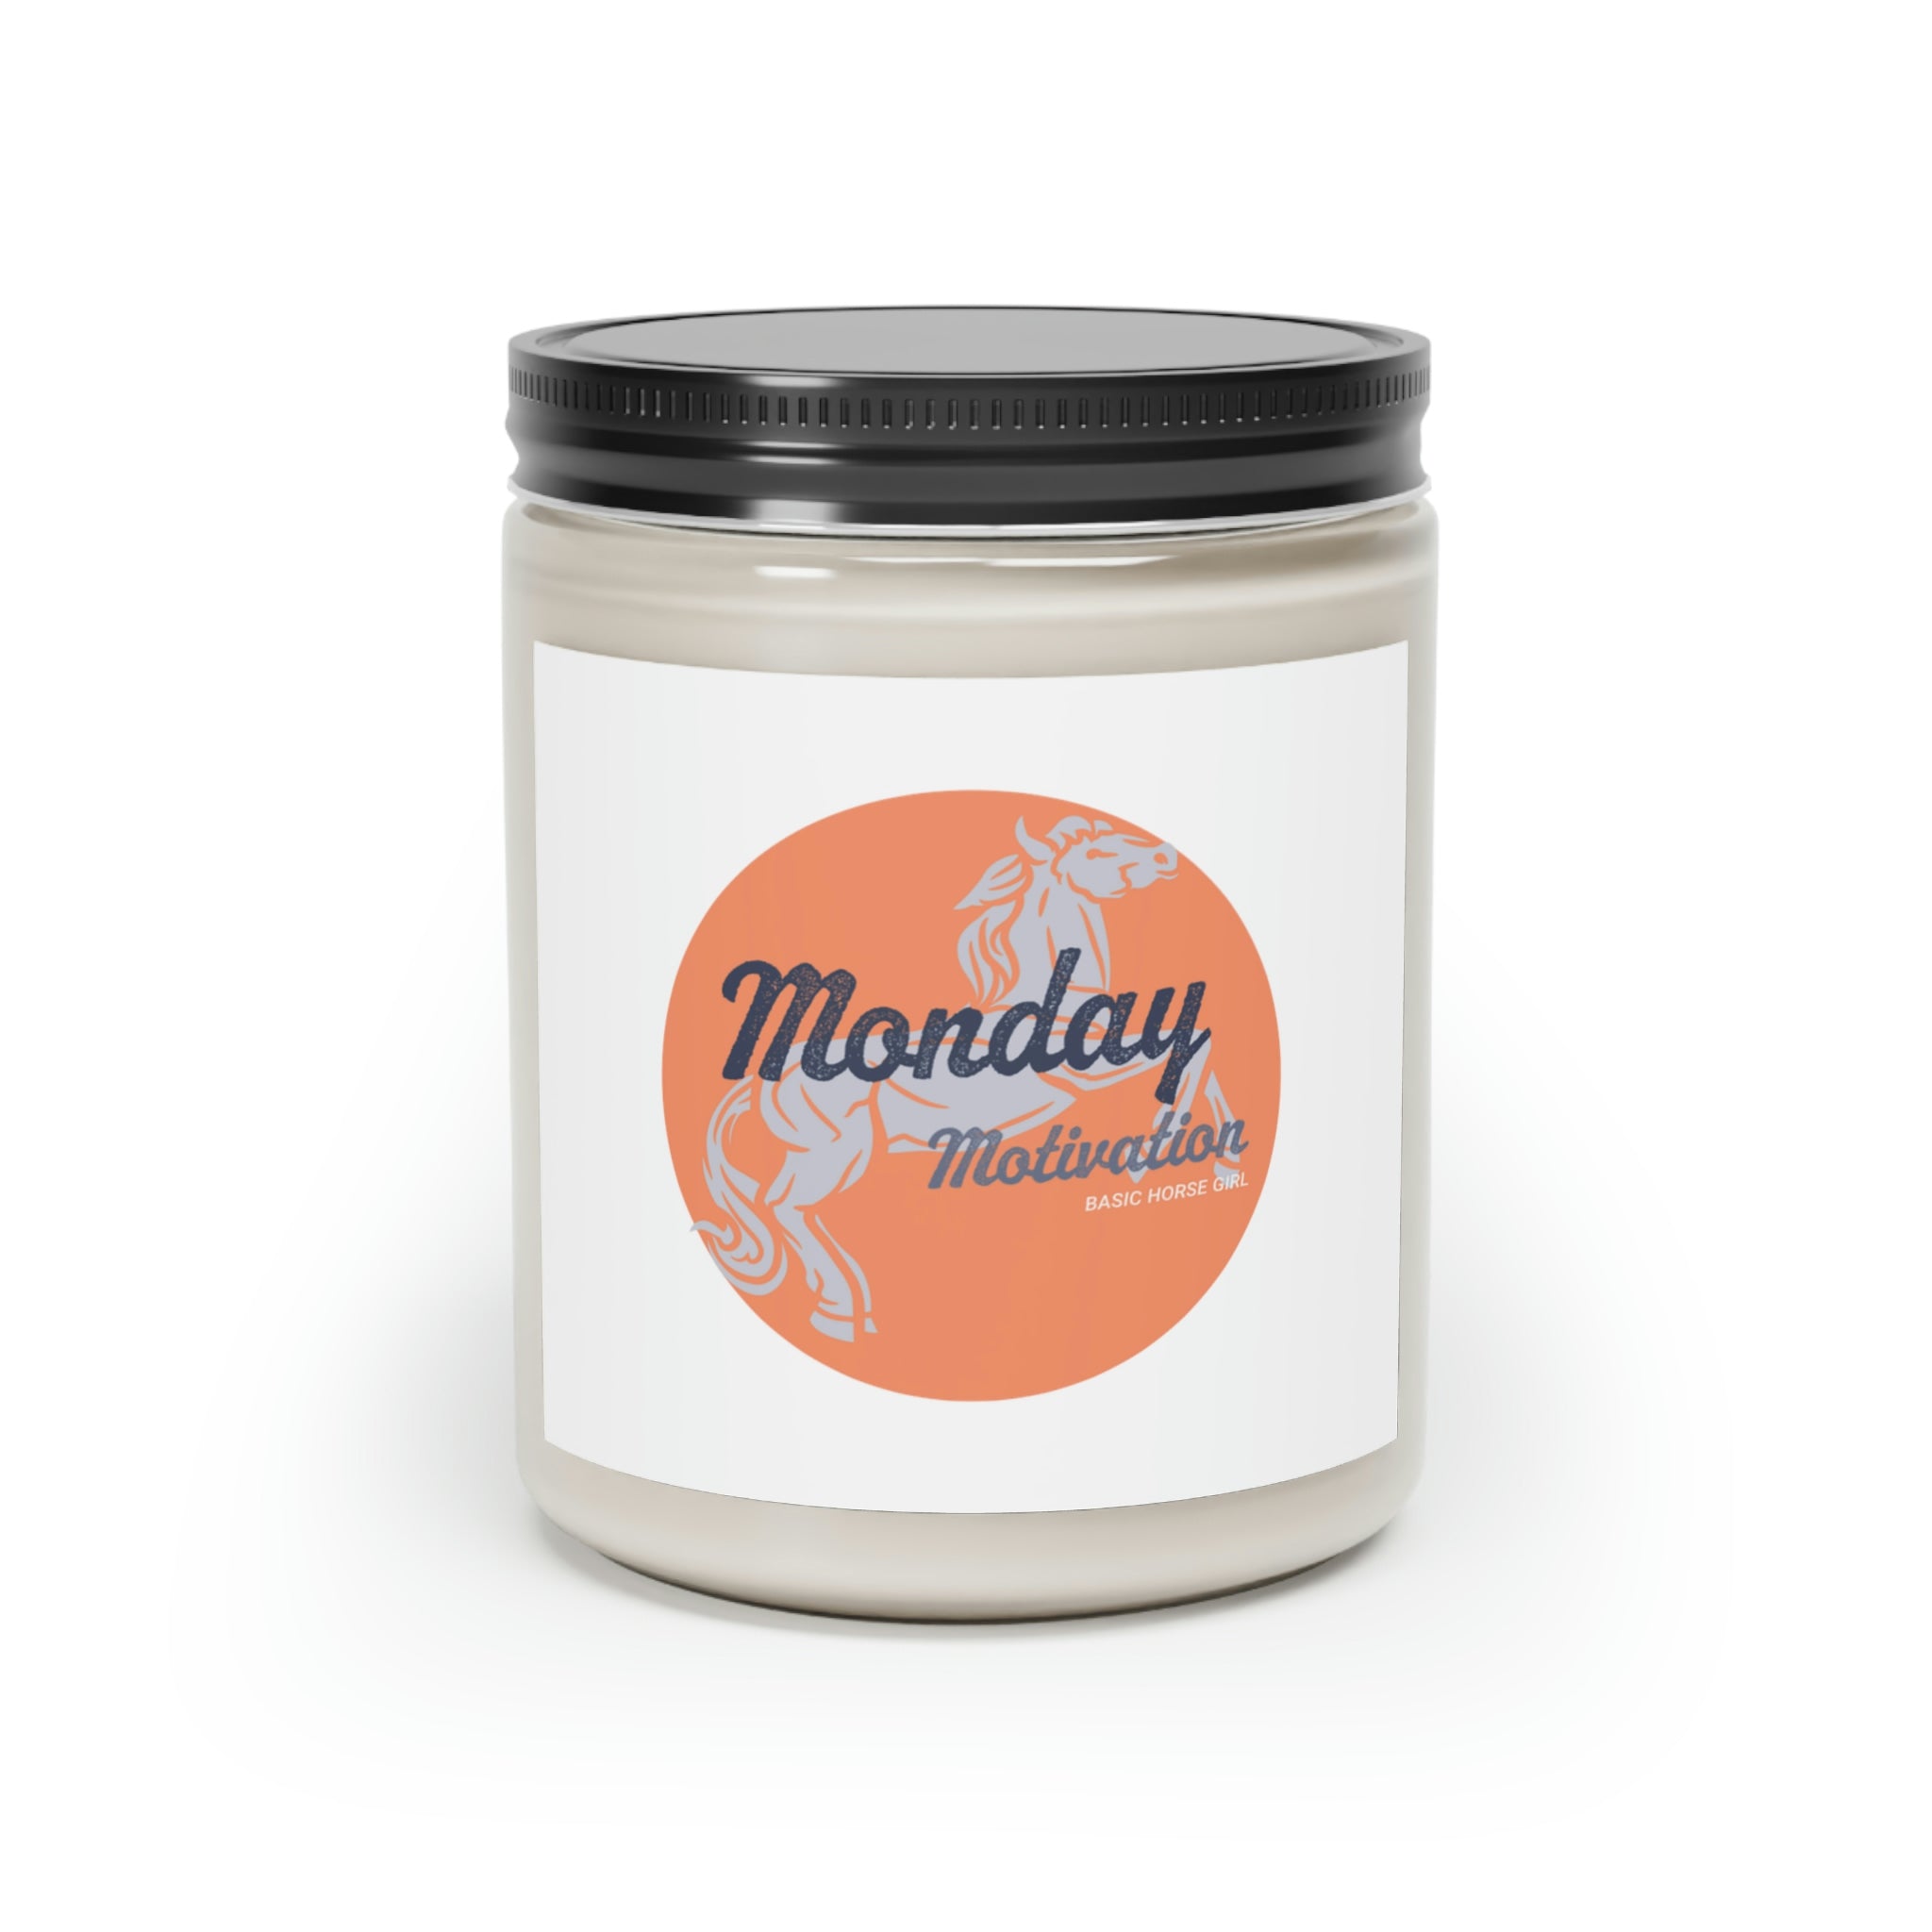 Monday motivation Scented Candle, 9oz